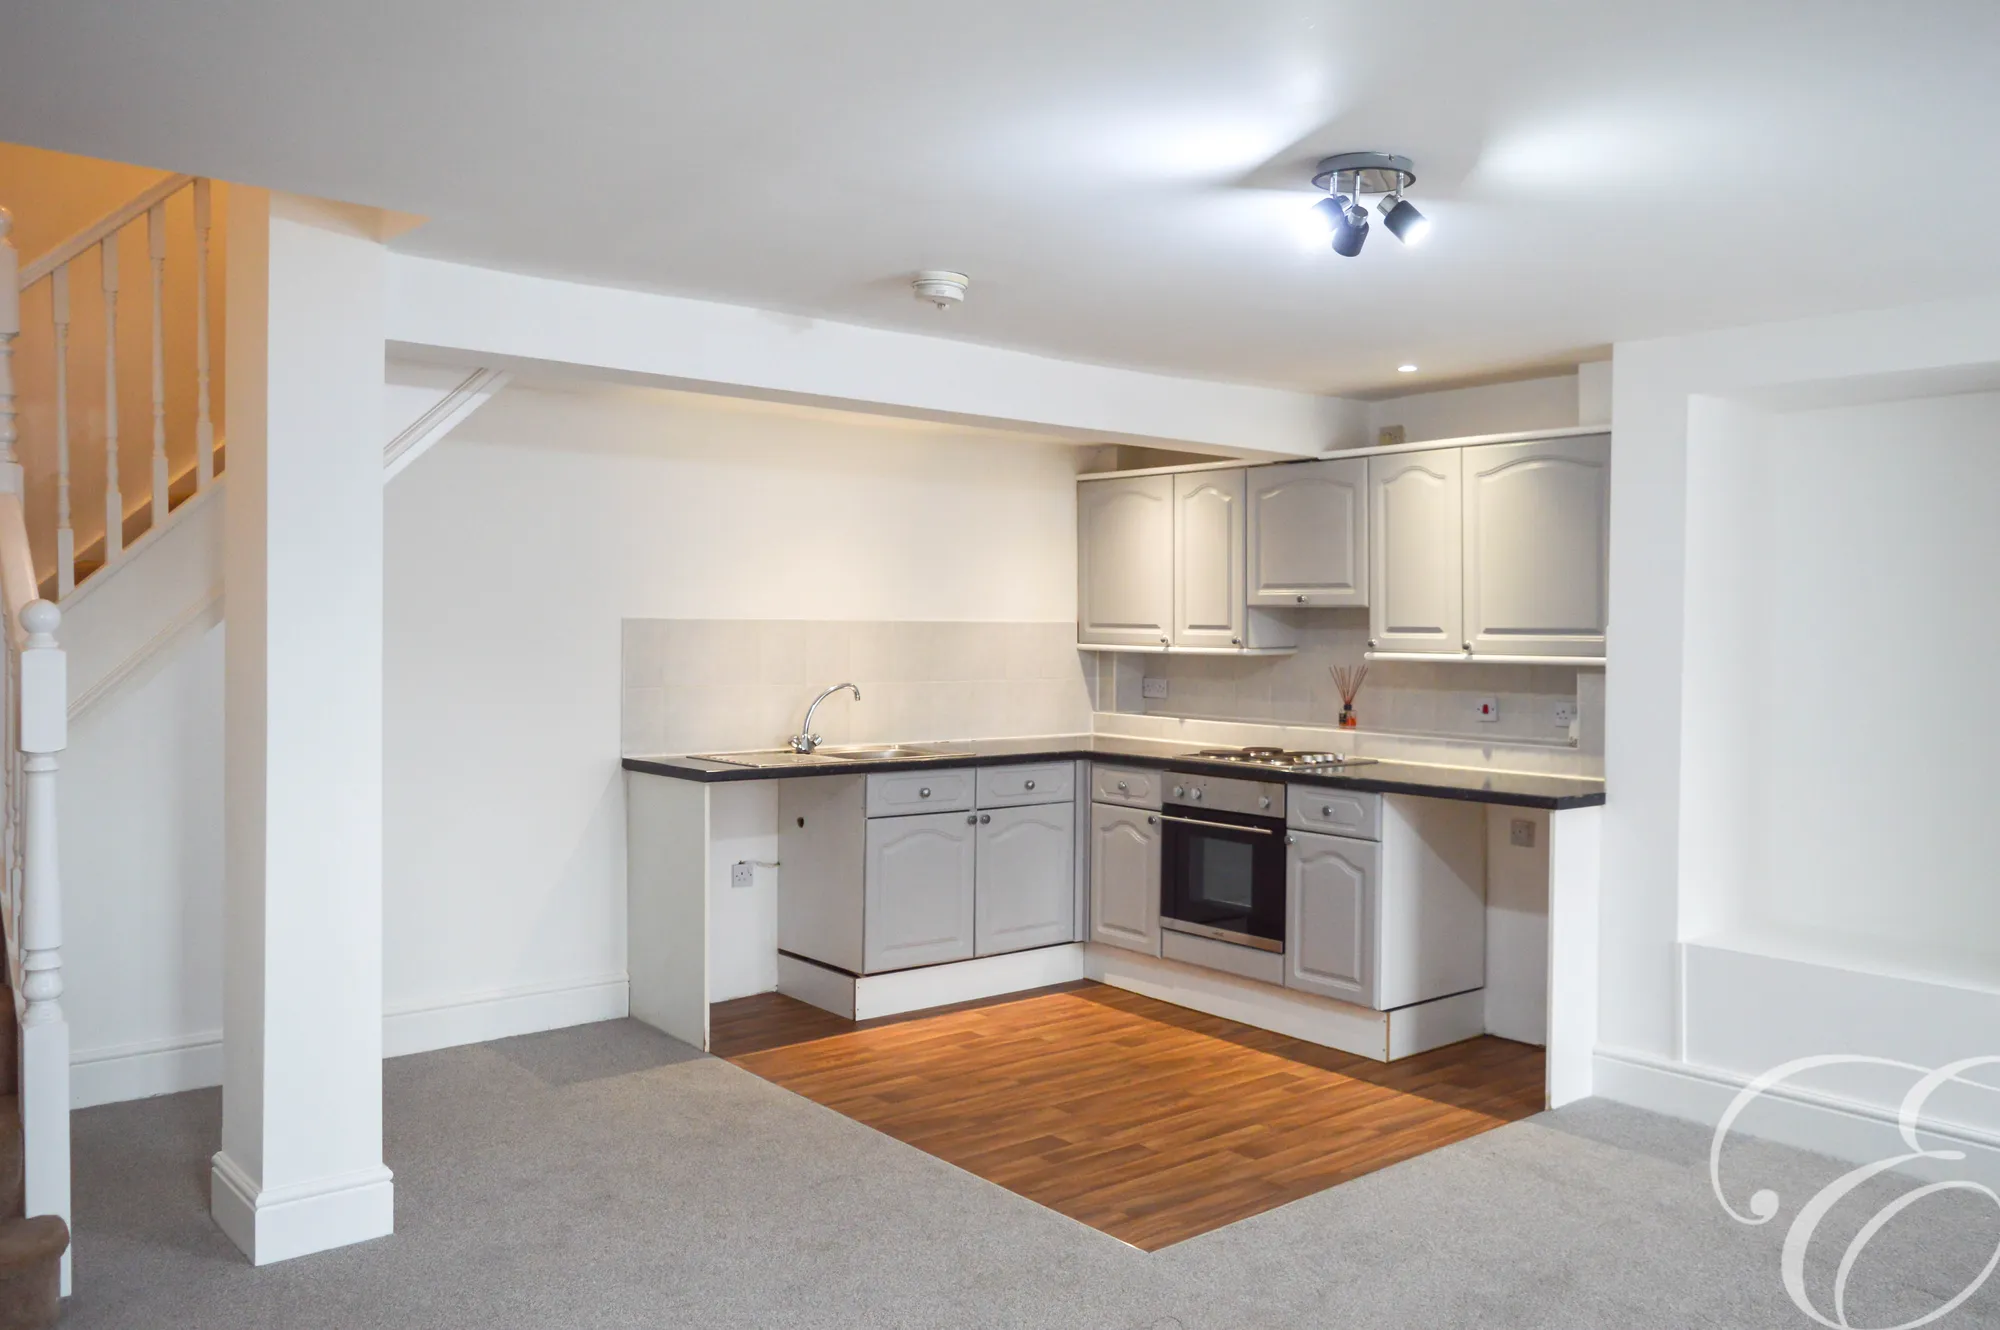 2 bed apartment to rent in East Street, Harwich - Property Image 1